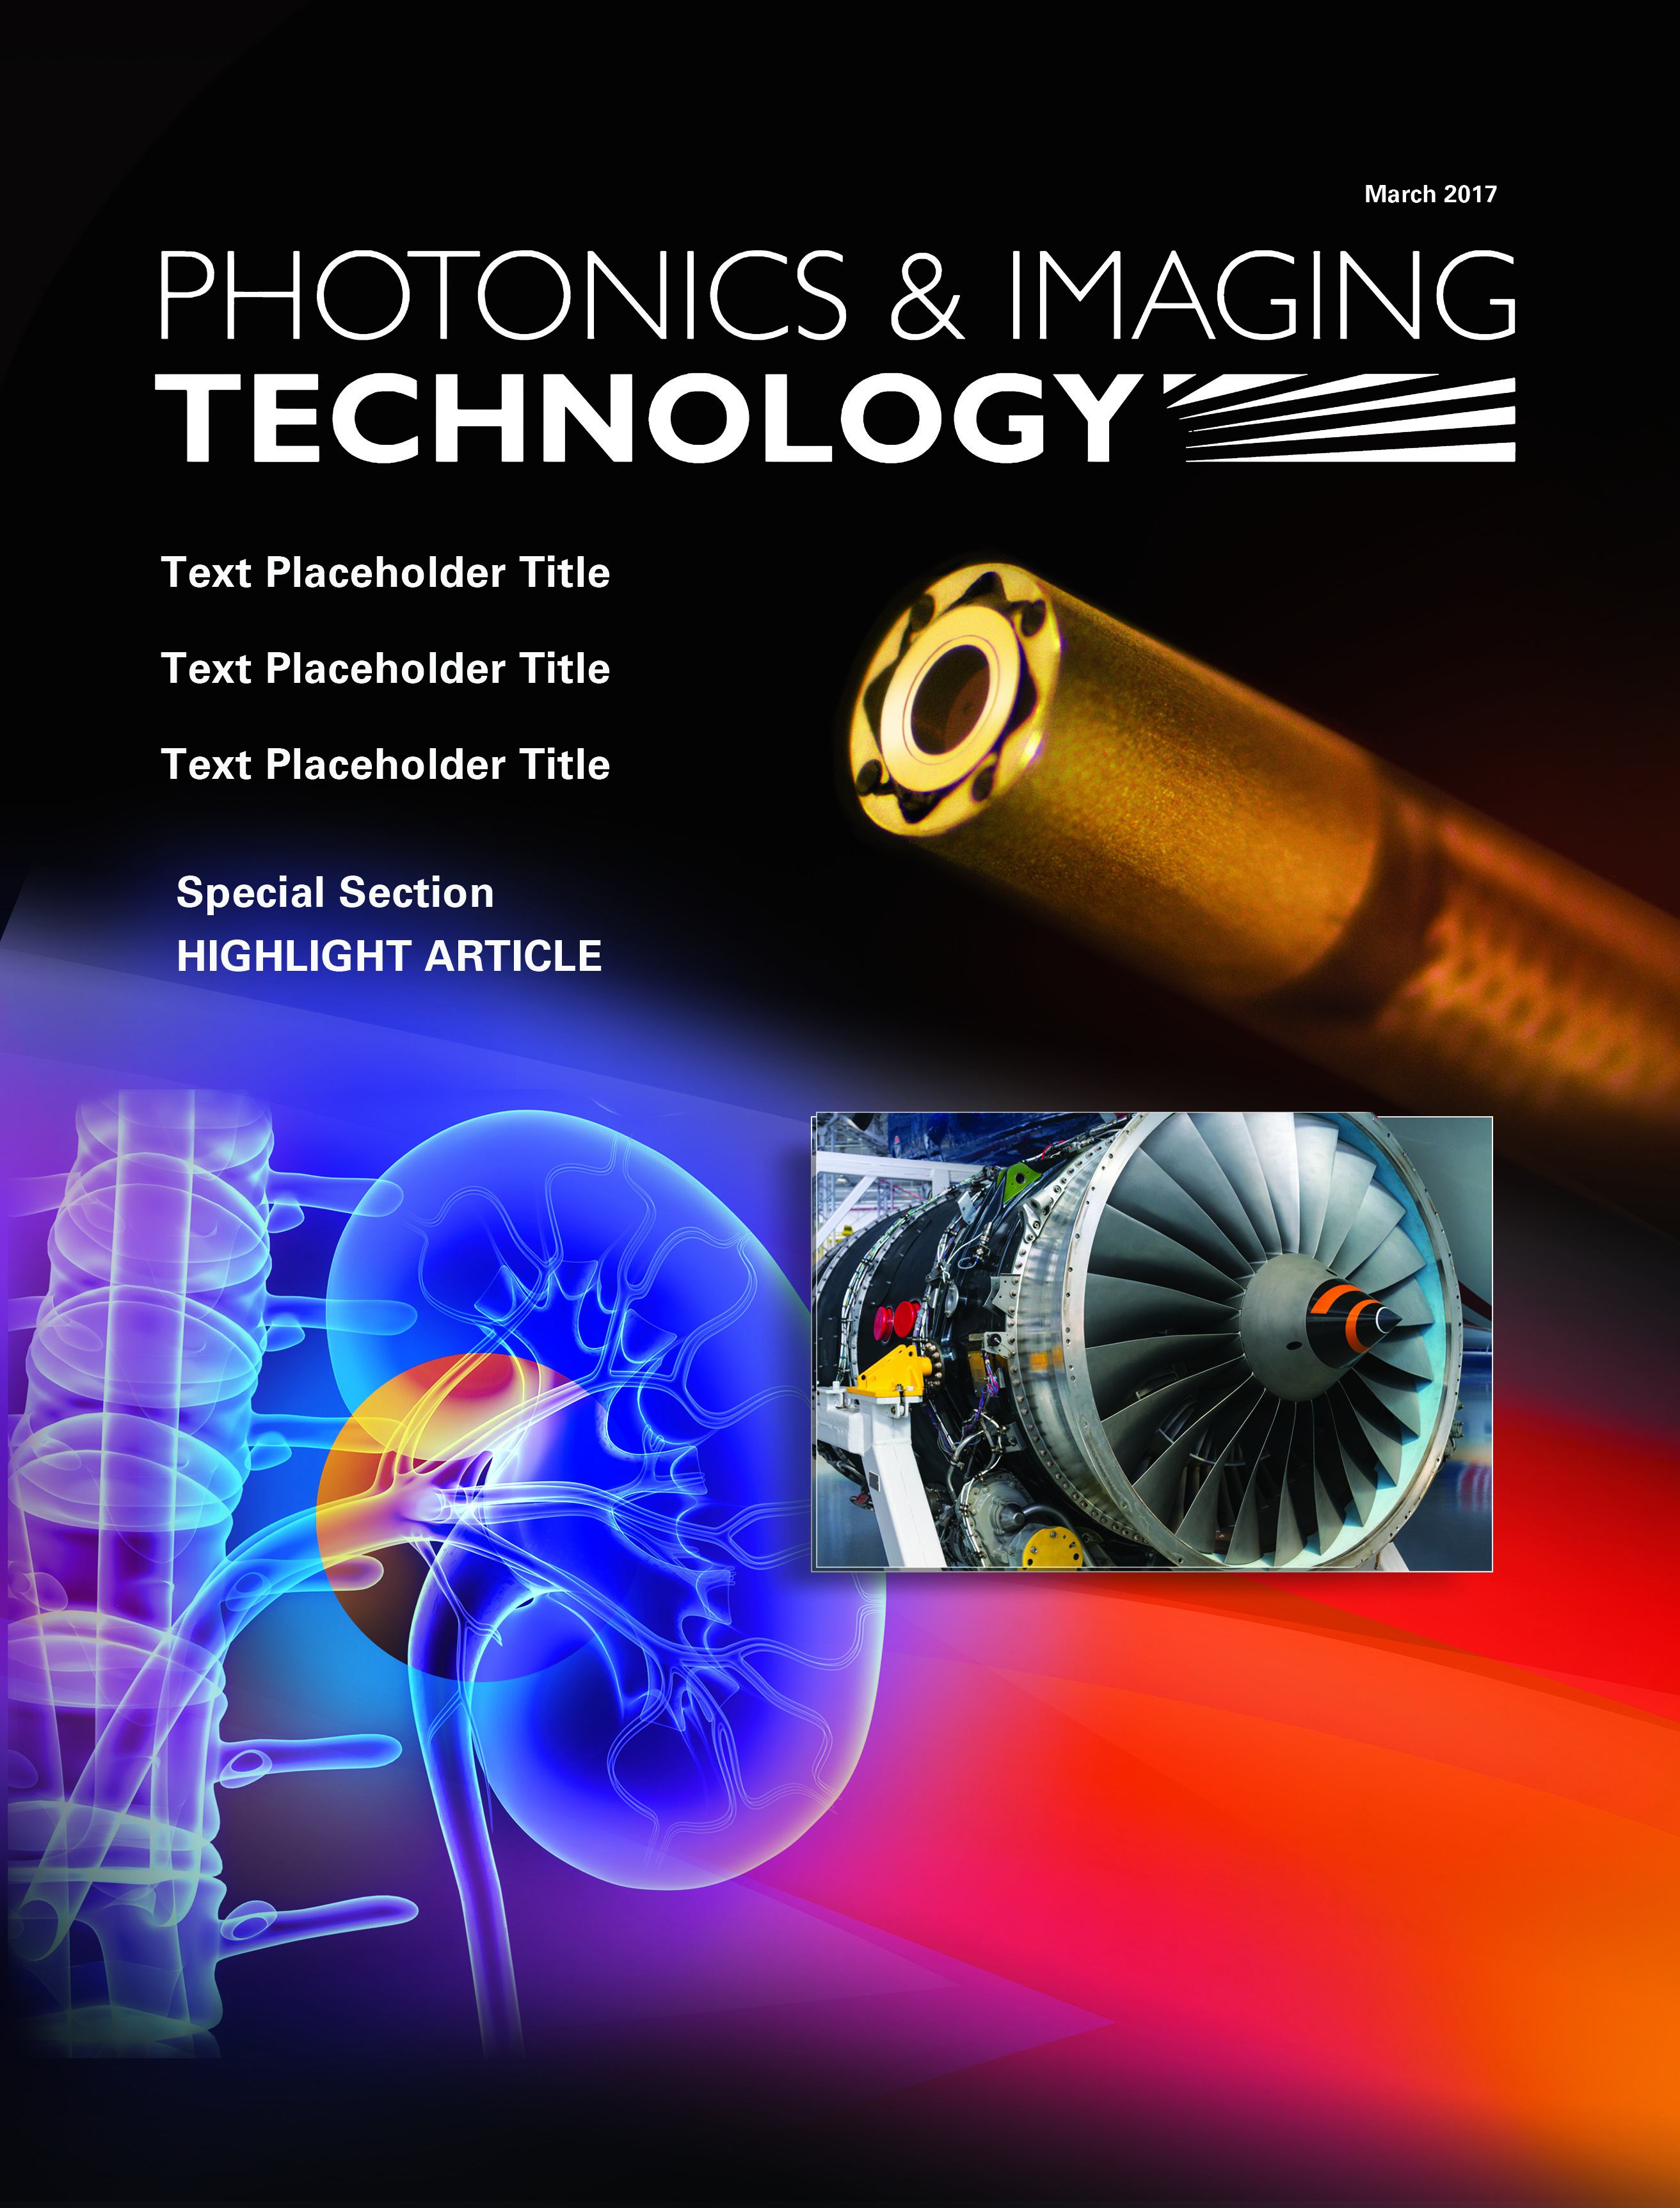 Smith Miller Moore created a Photonics & Imaging Technology cover to highlight the use of chip-on-tip cameras featured in an article by Toshiba Imaging Systems Division